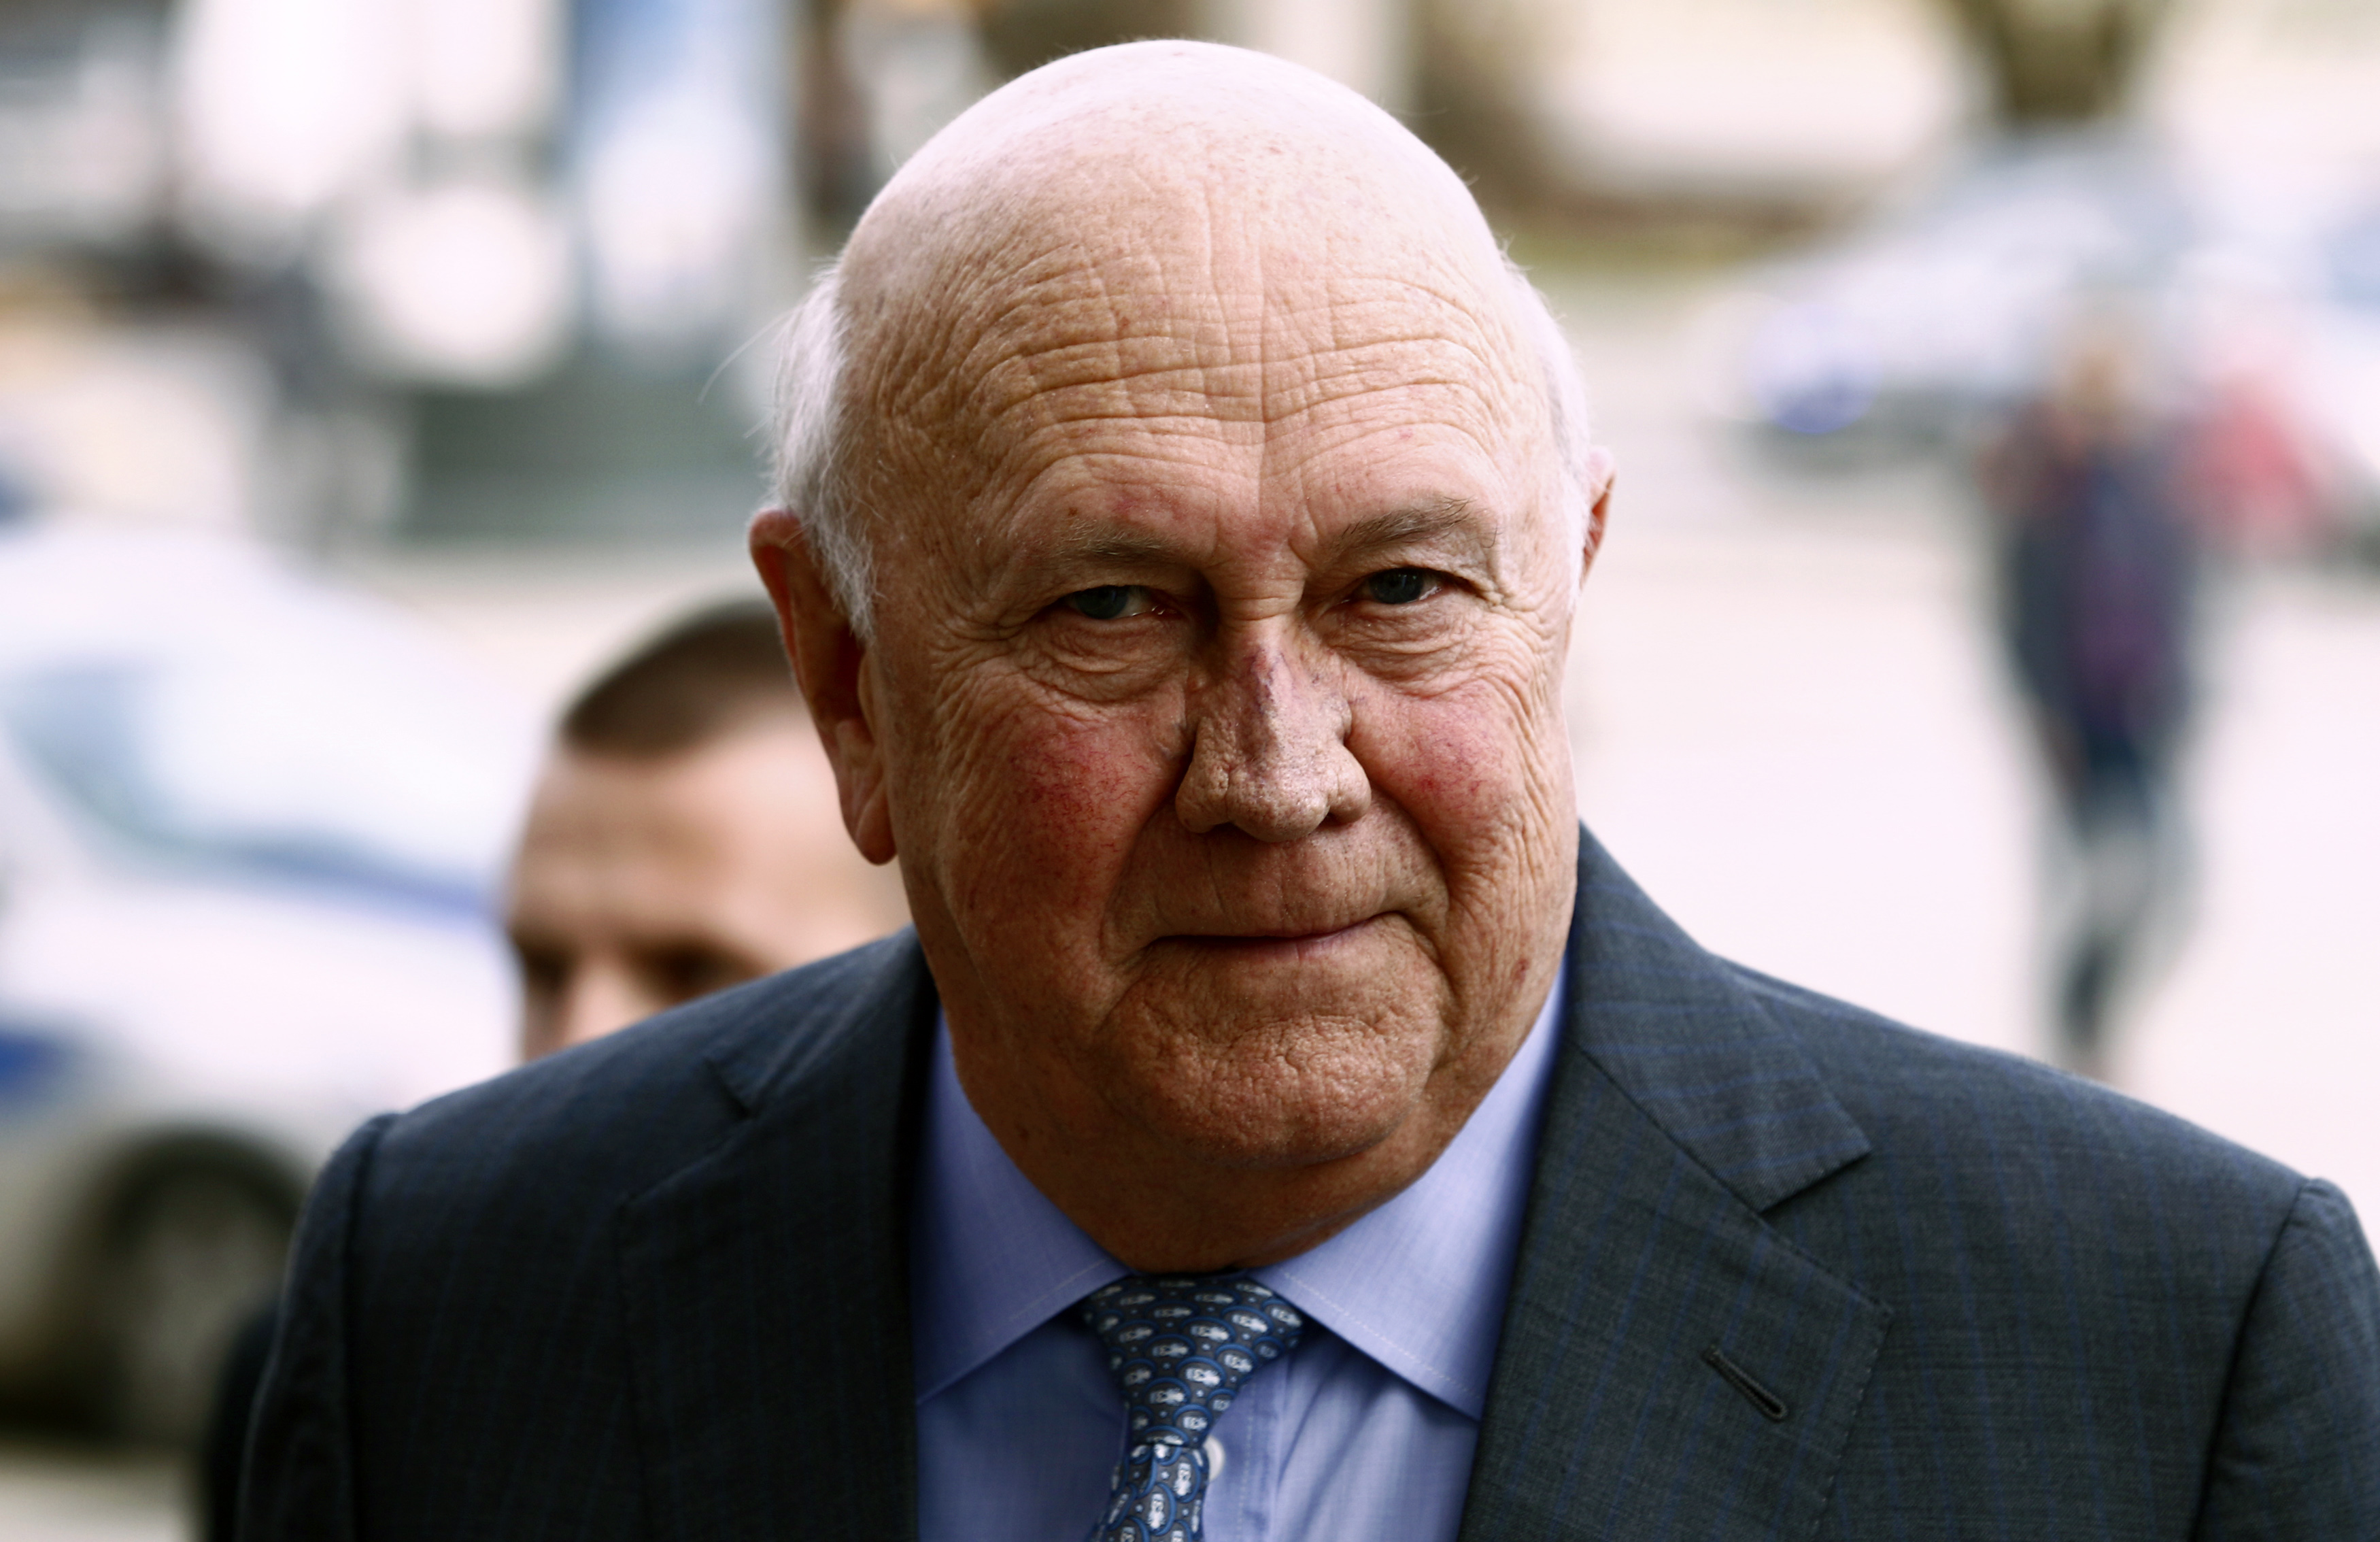 South Africa's former president Willem de Klerk arrives at news conference ahead of the 13th World Summit of Nobel Peace Prize Laureates in Warsaw